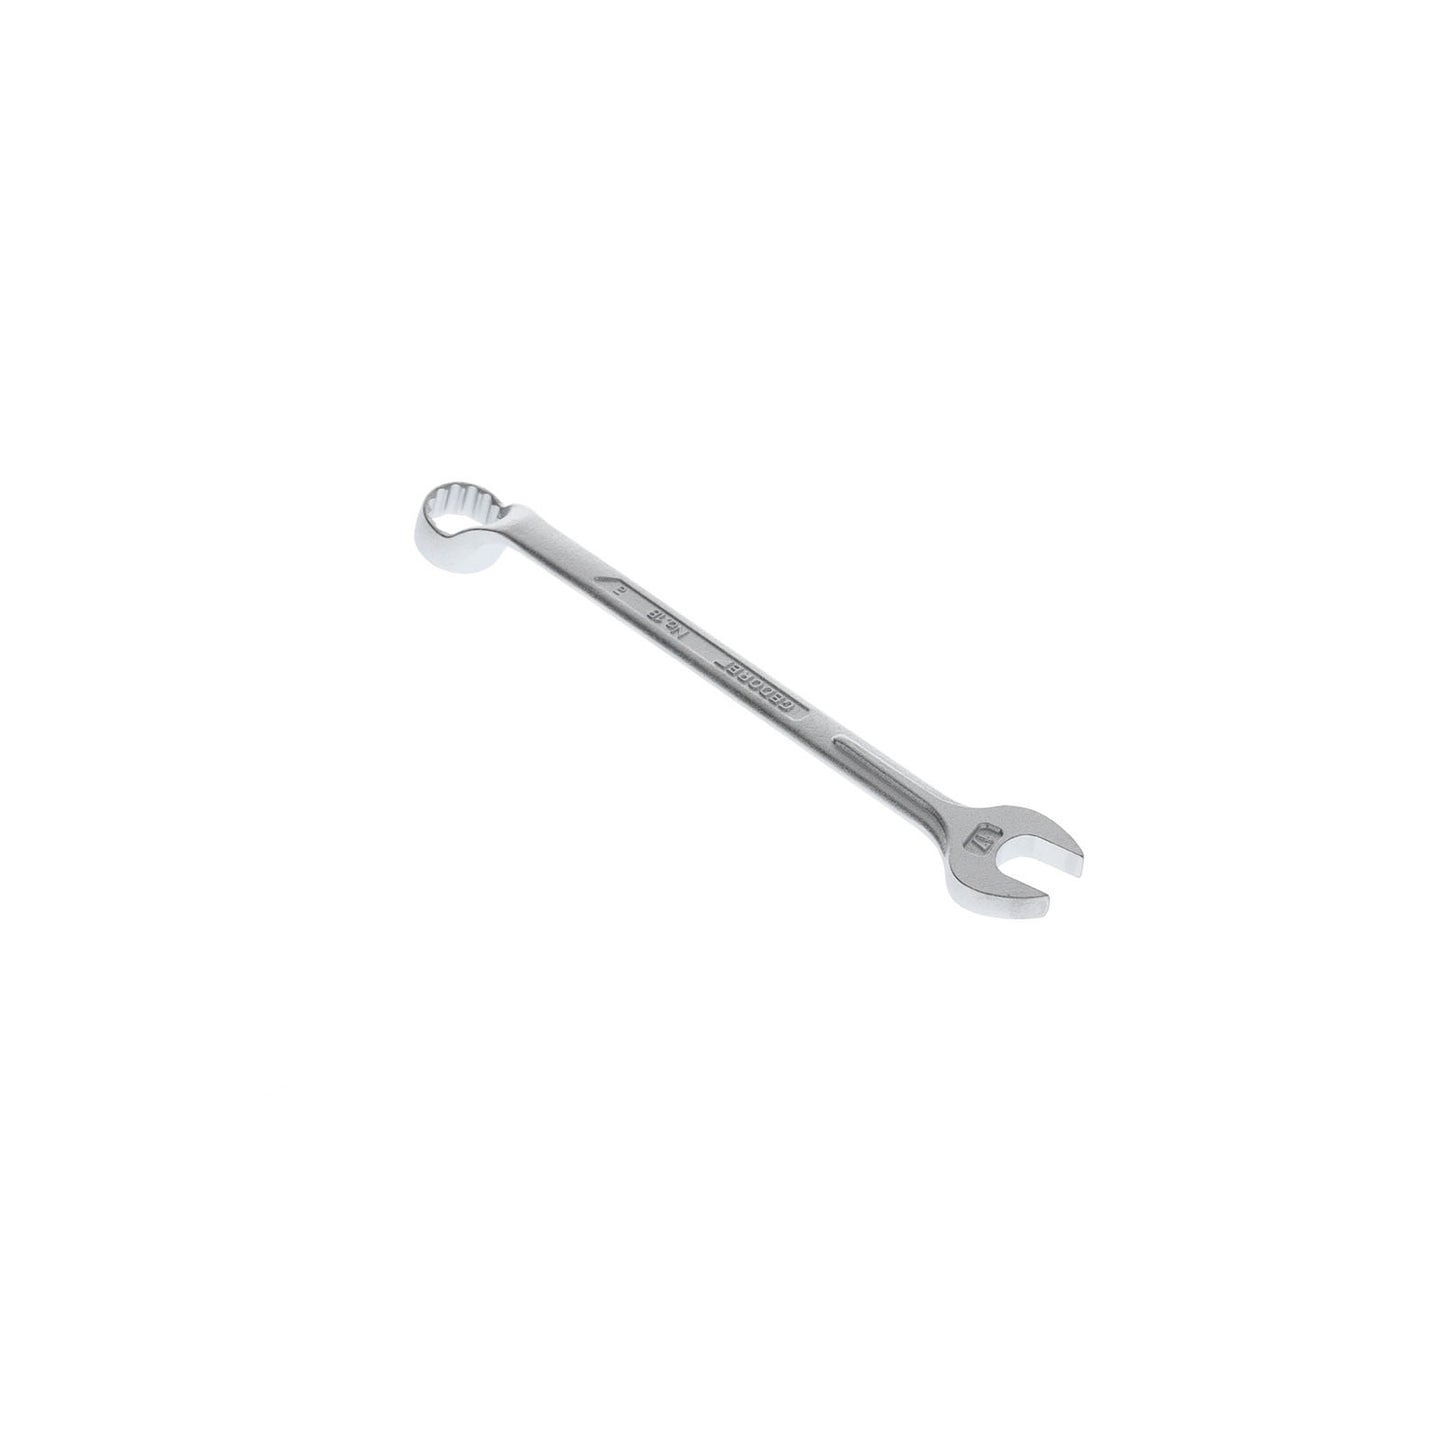 GEDORE 1 B 17 - Offset Combination Wrench, 17mm (6001640)